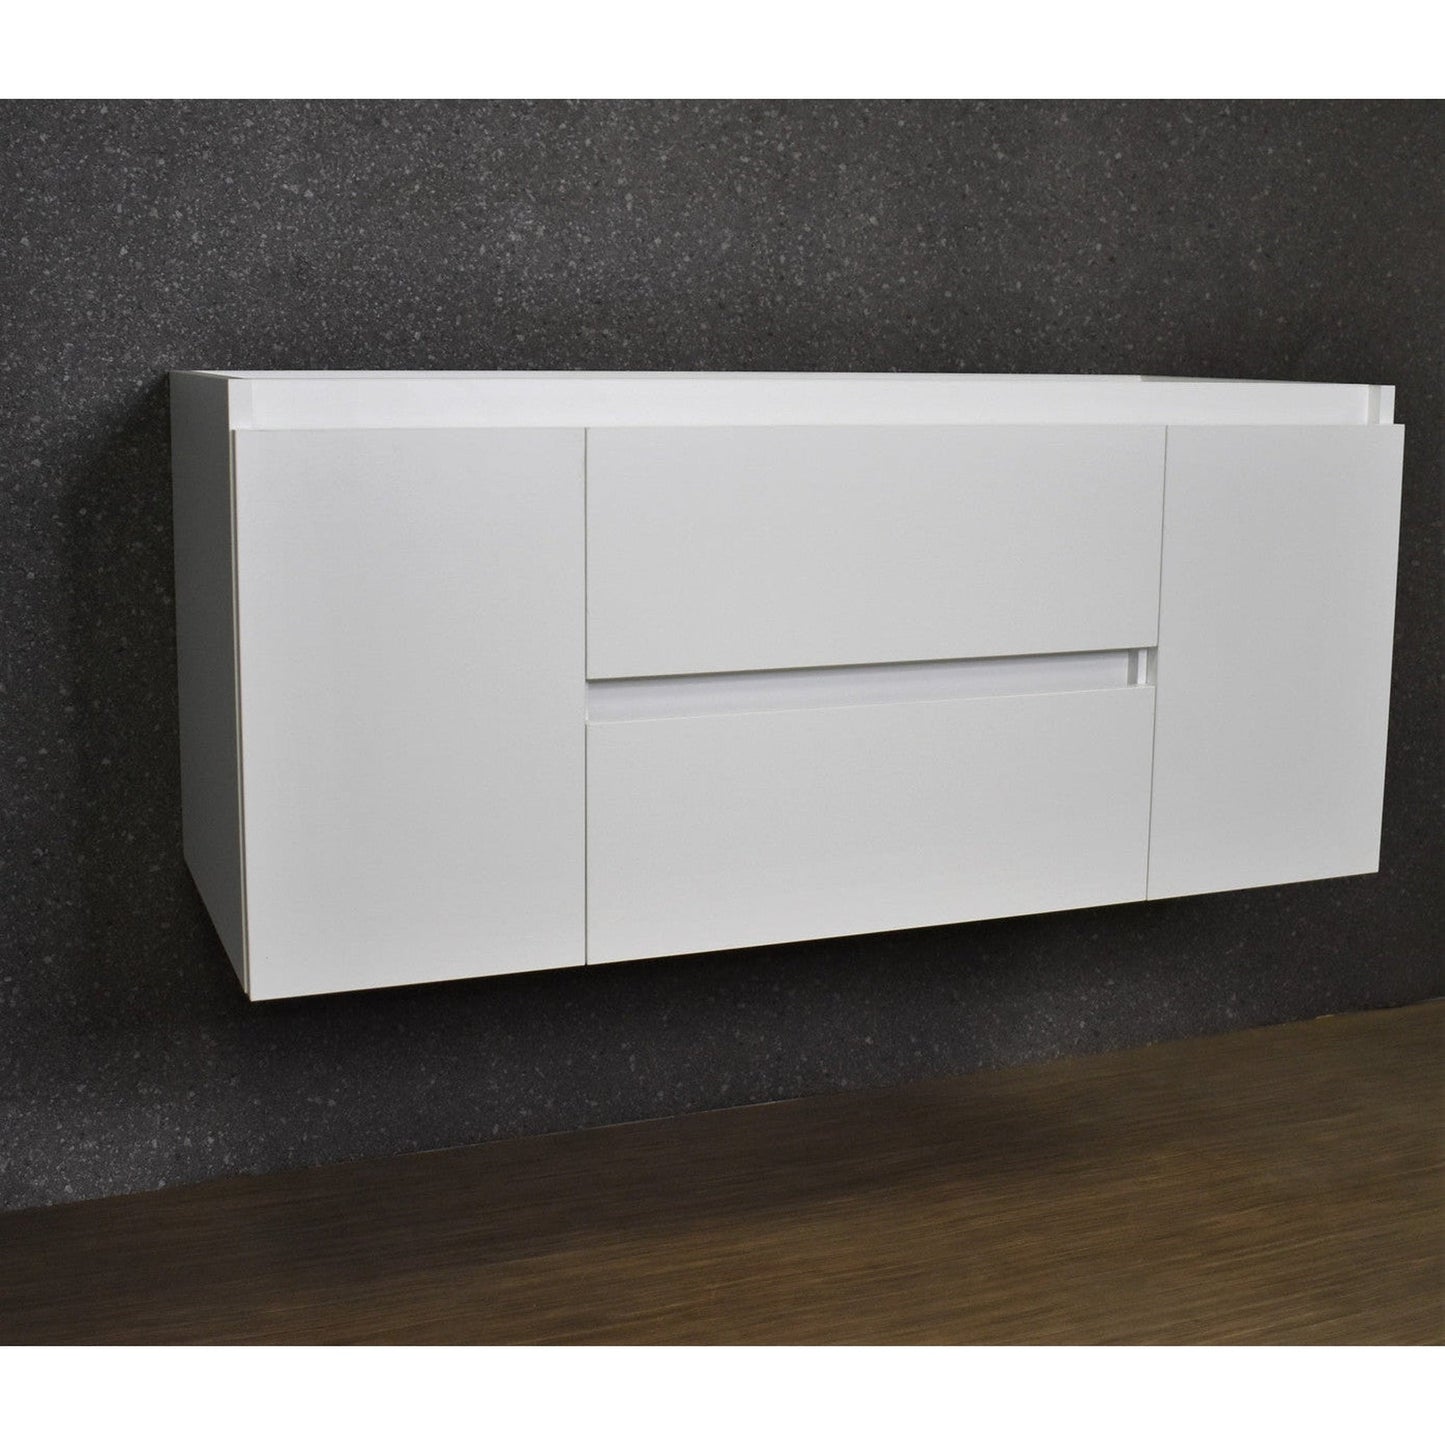 Volpa USA Salt 48" x 18" White Wall-Mounted Floating Bathroom Vanity Cabinet with Drawers